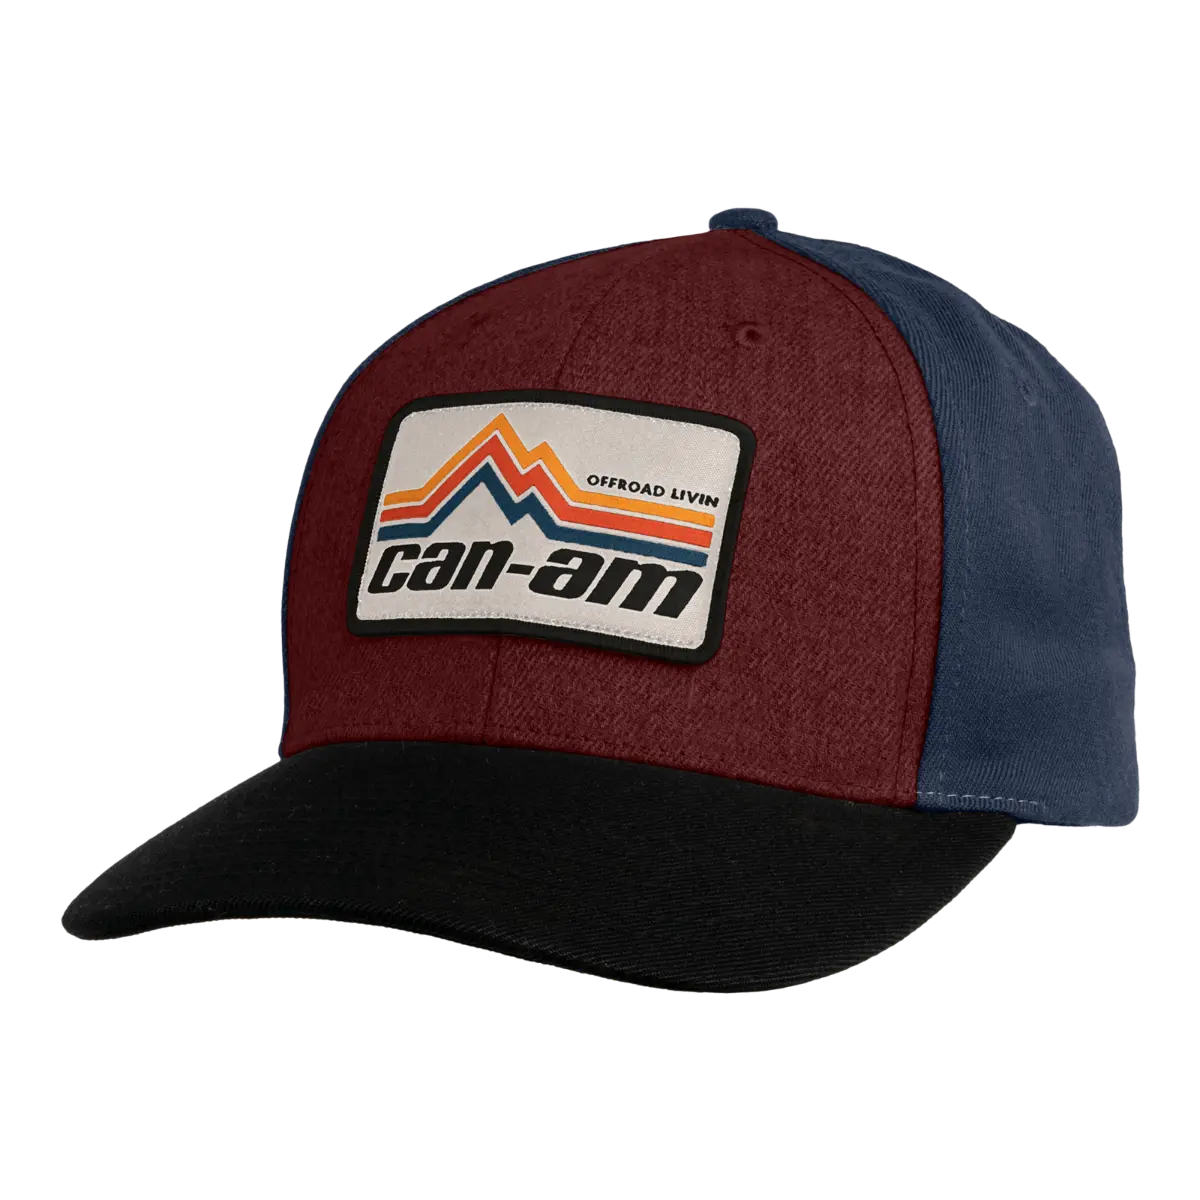 Can-am Caps